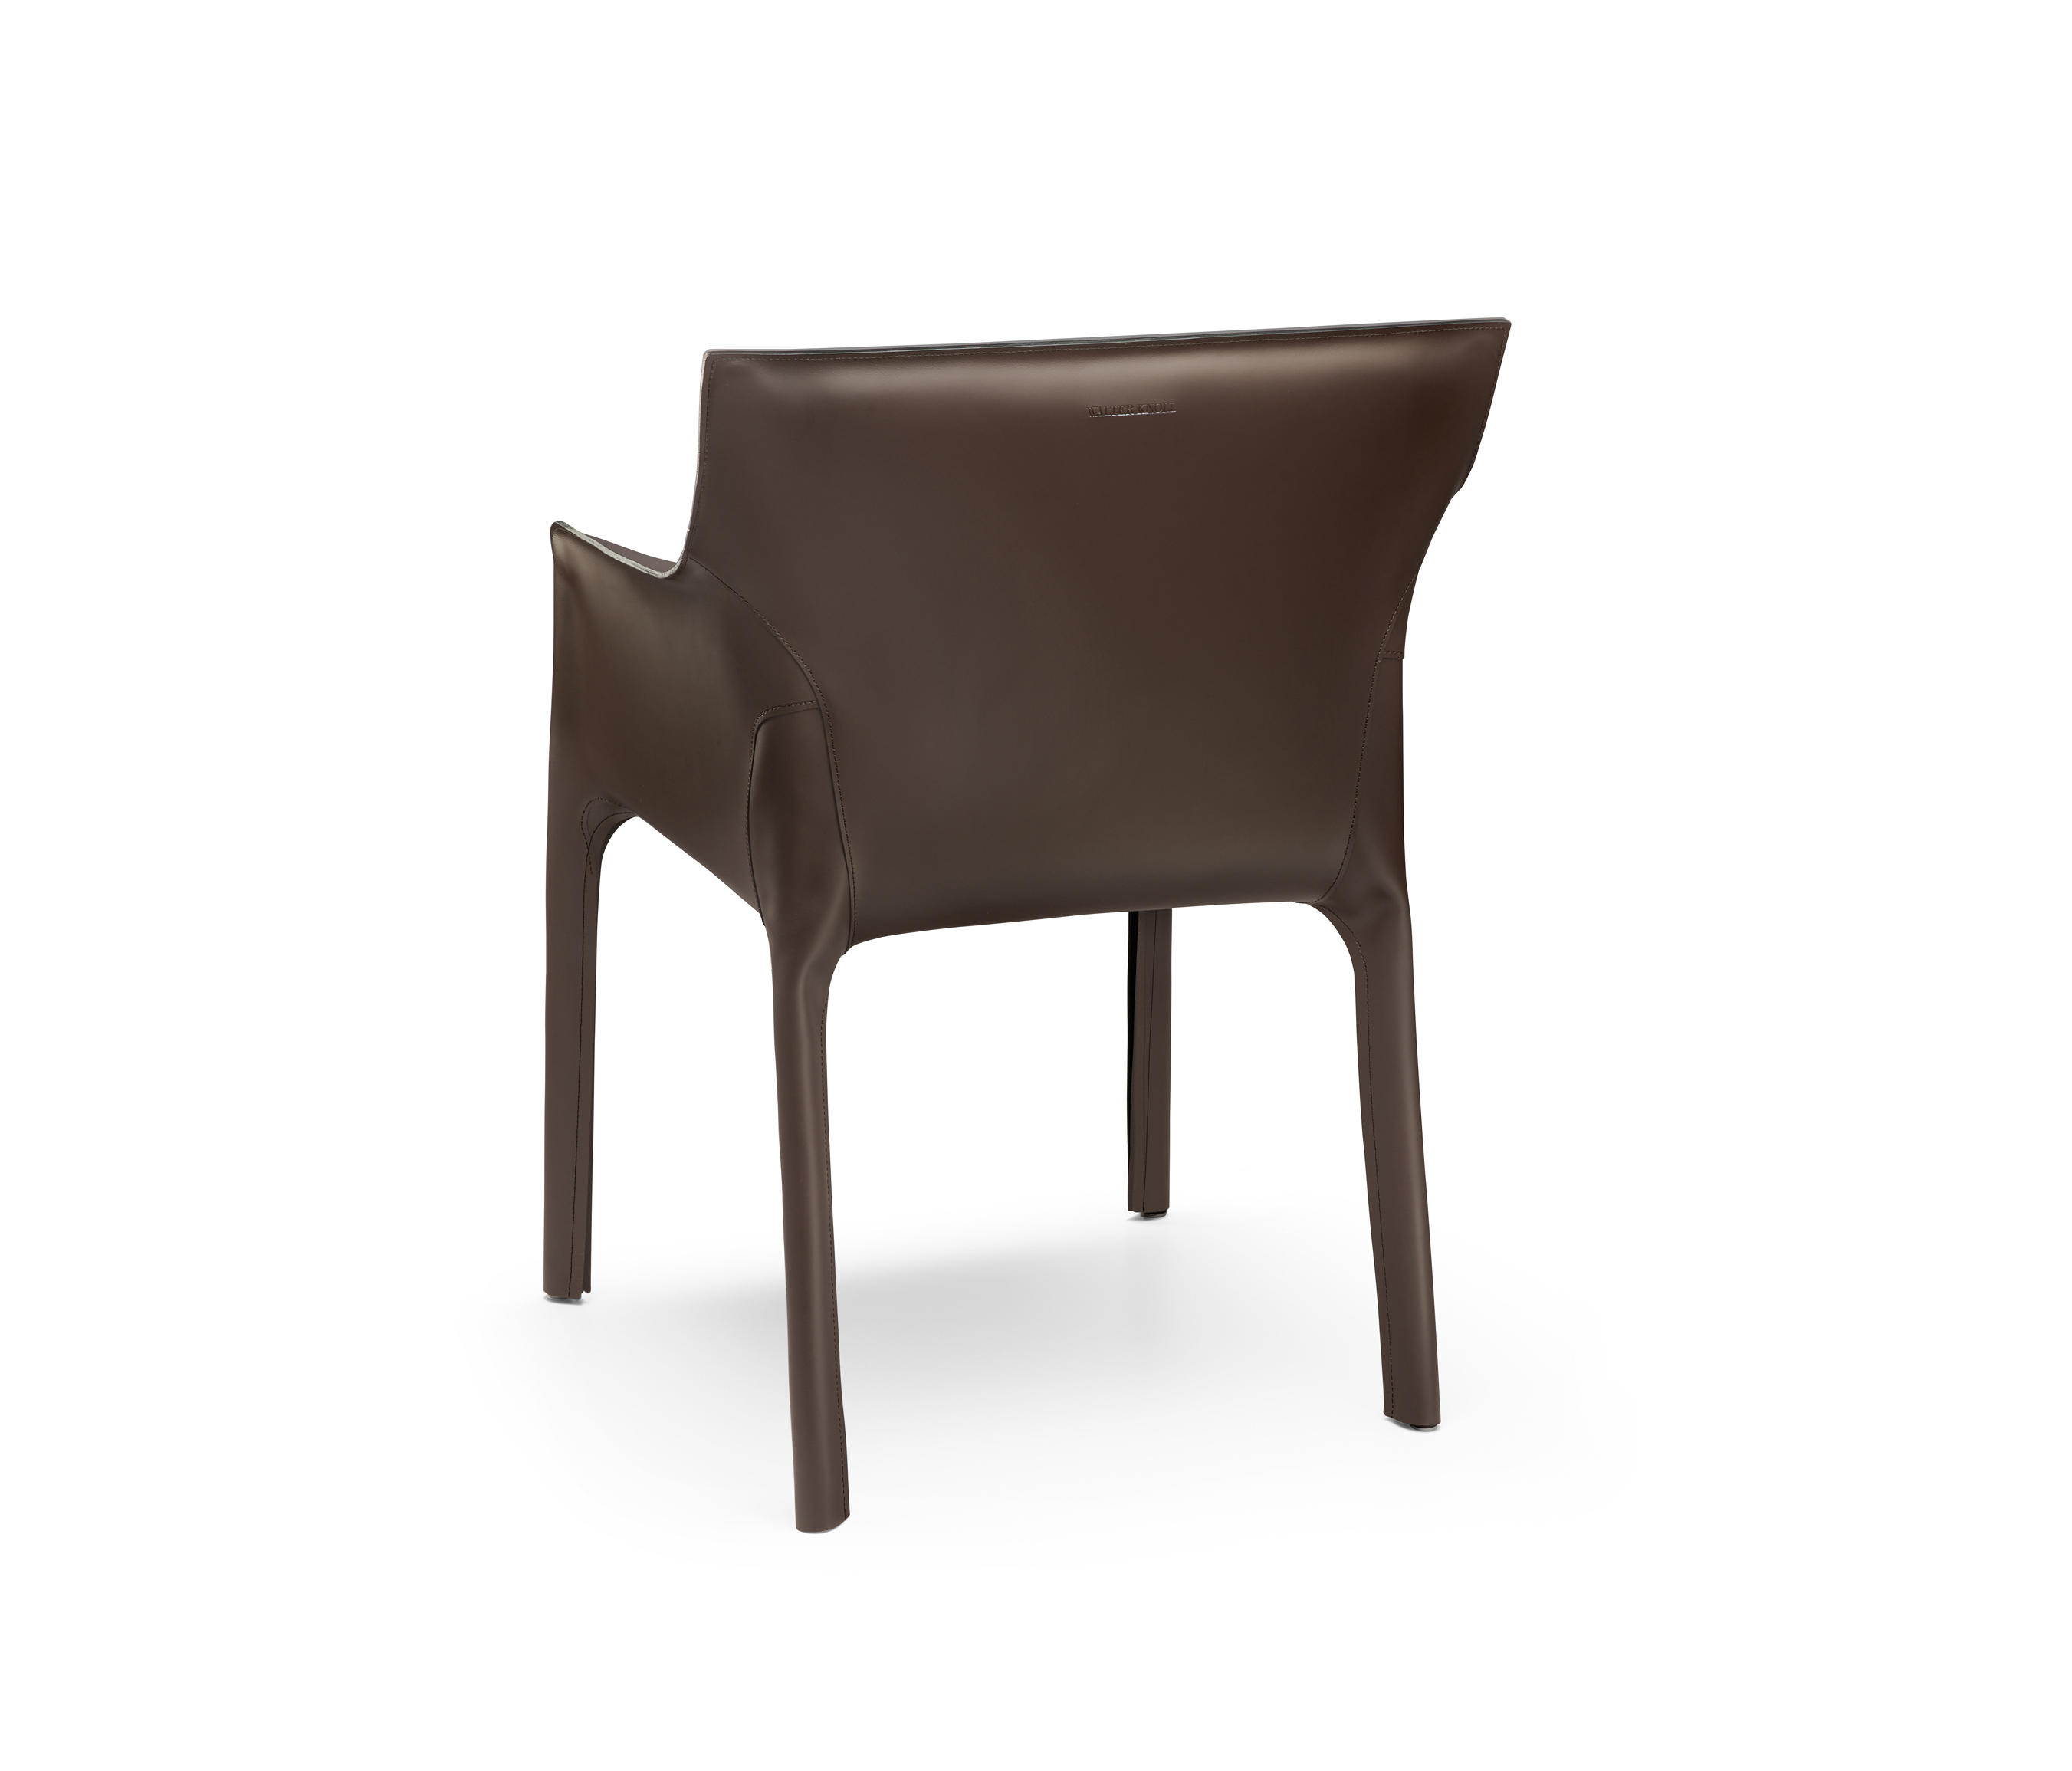 SADDLE CHAIR - Restaurant chairs from Walter Knoll | Architonic